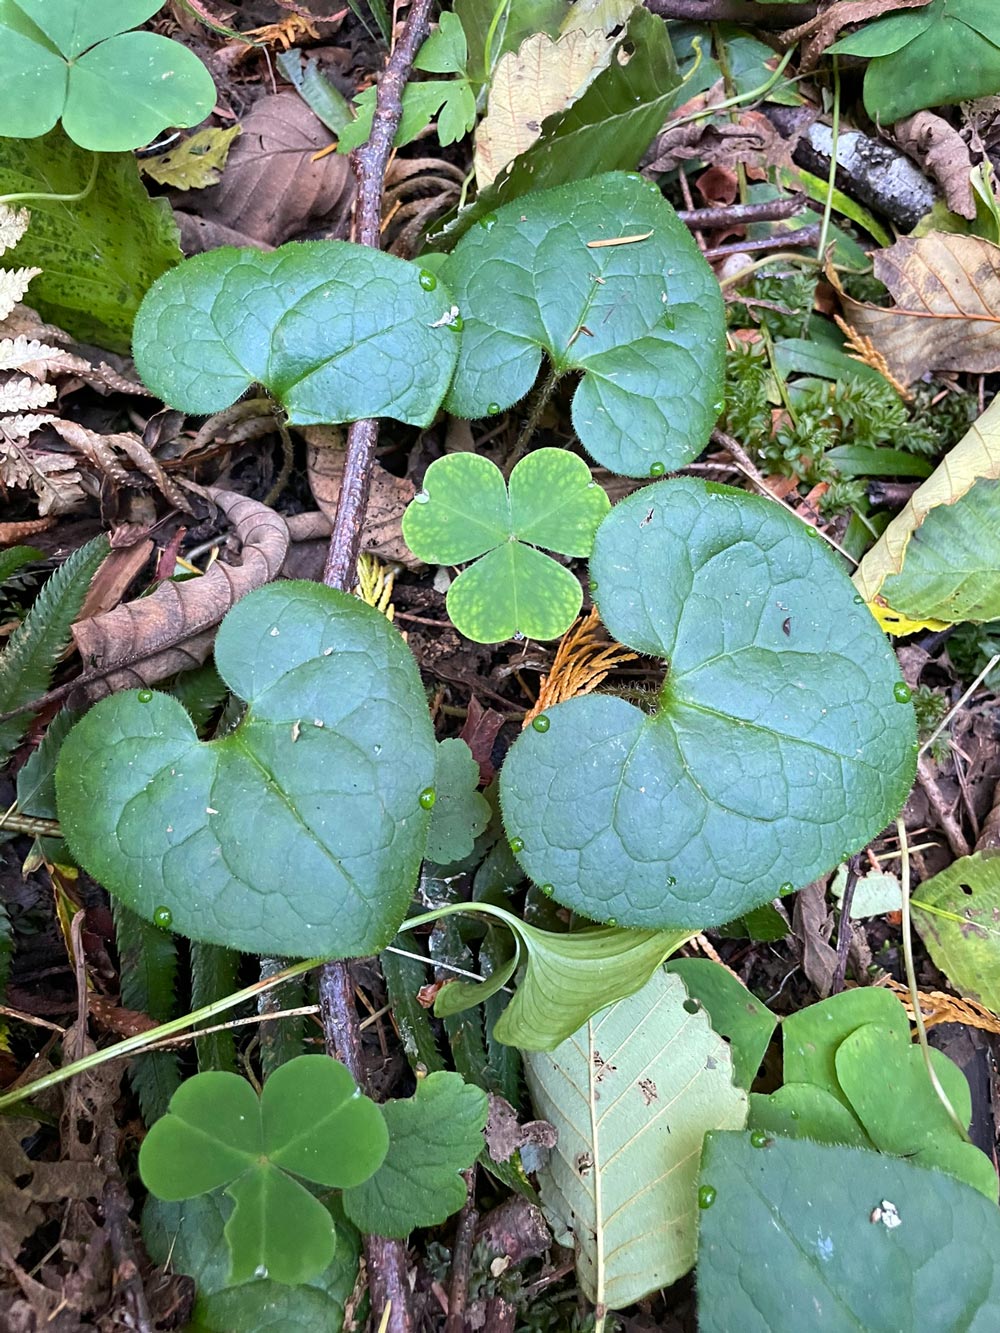 Multiple ground level green plants, one larger, shaped like an inverted heart, and darker green, the other looks like a a clover, three leaves, also heart shaped and lighter green